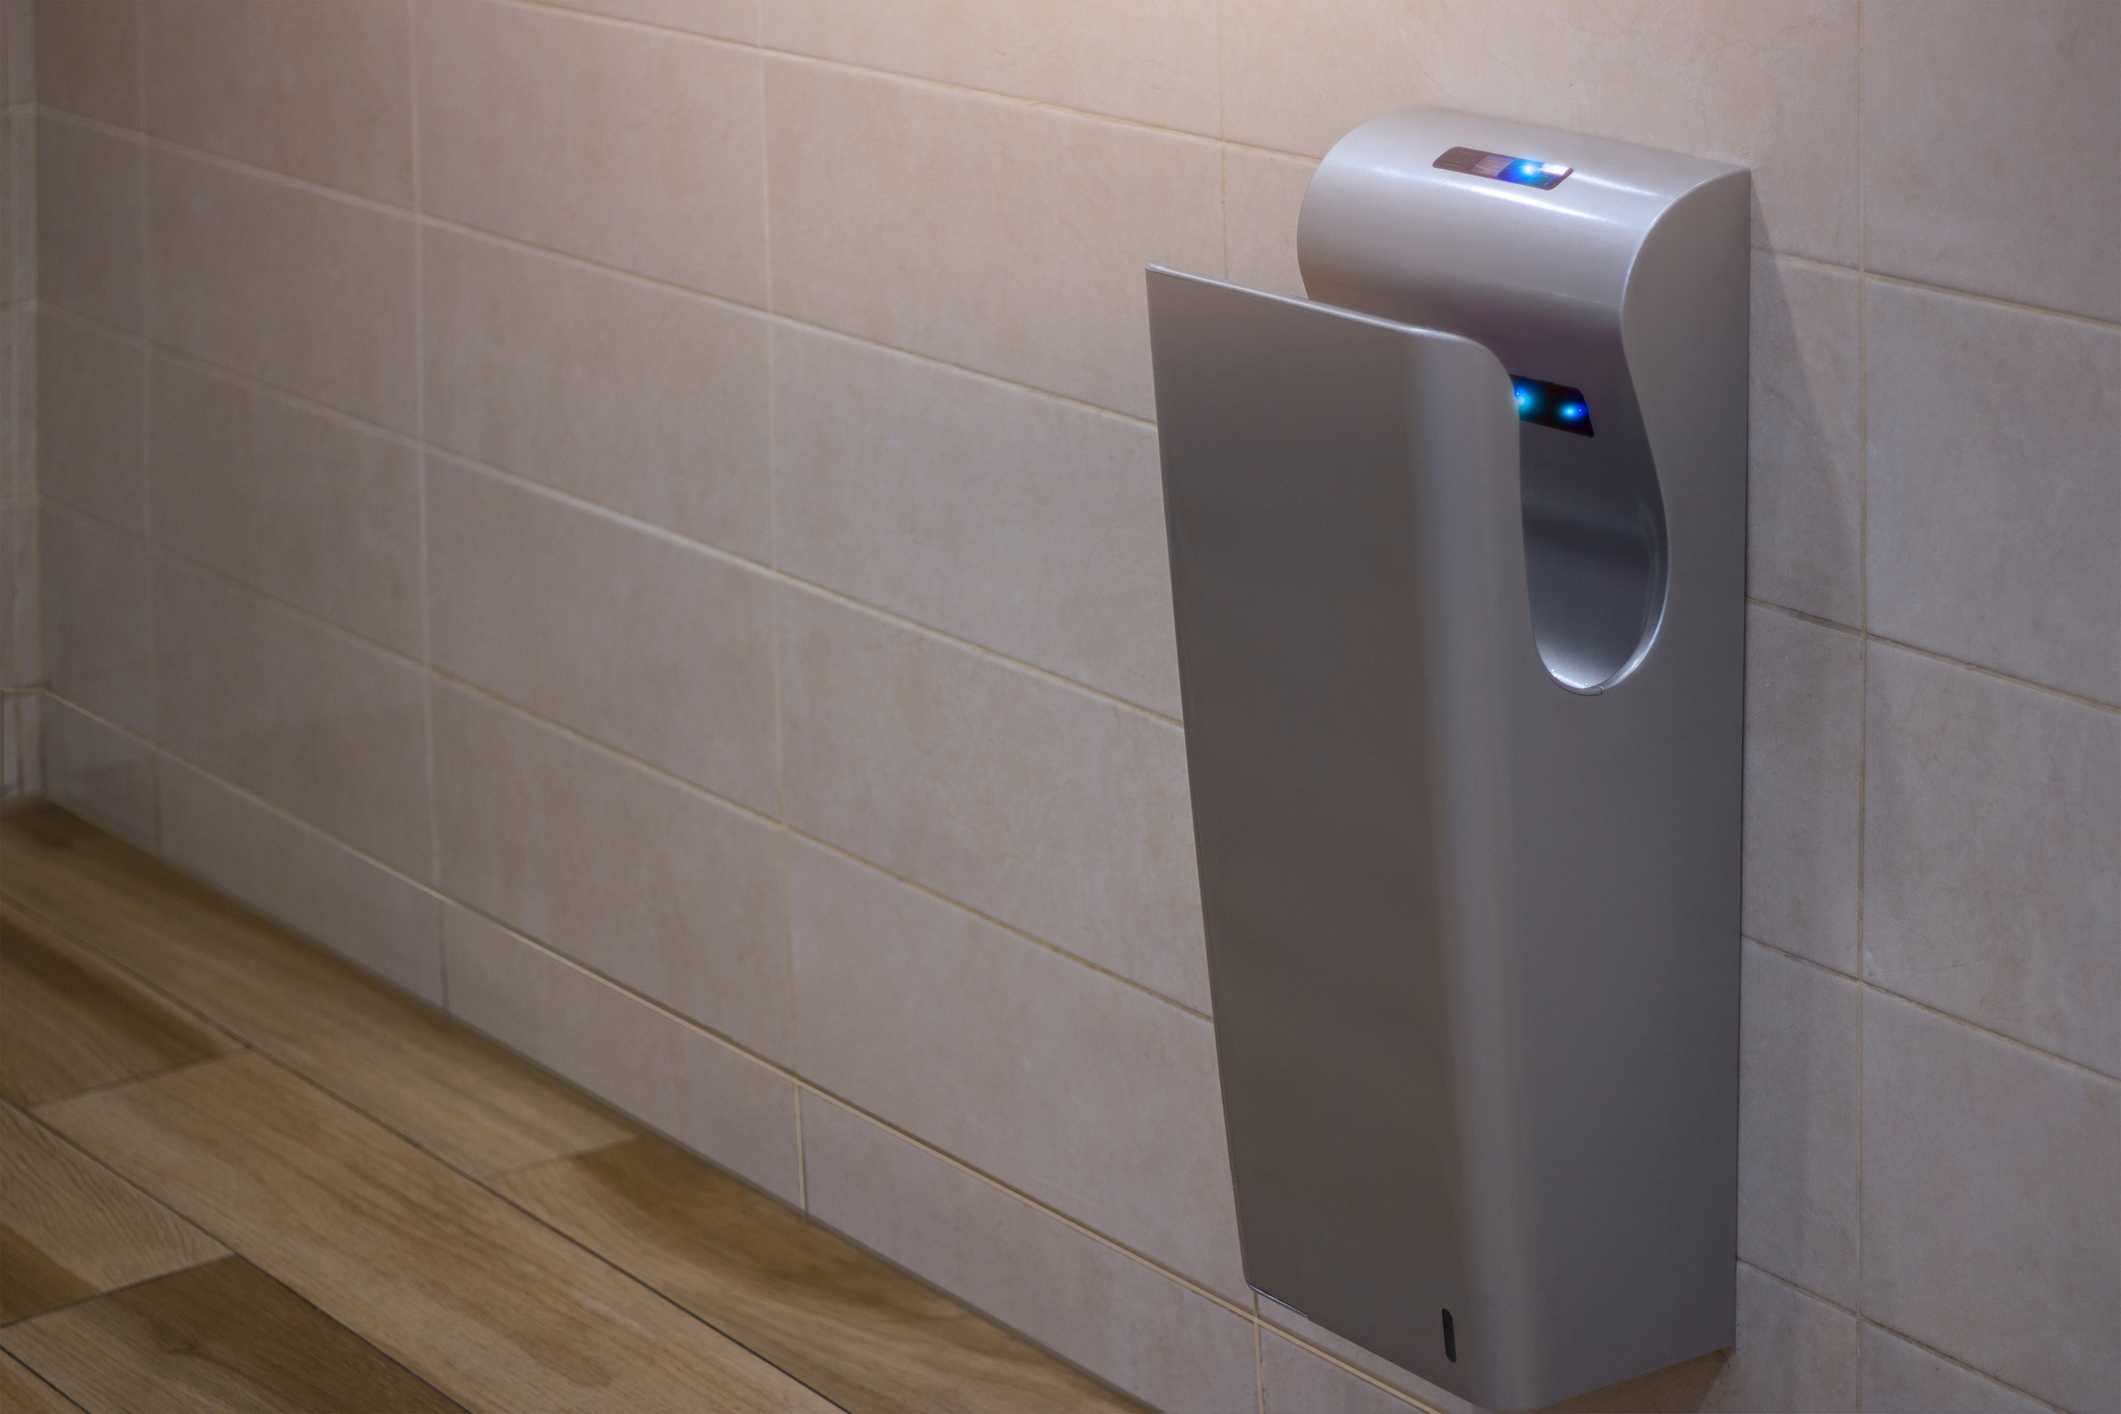 This picture will make you never want to use a 'hygienic' hand dryer again